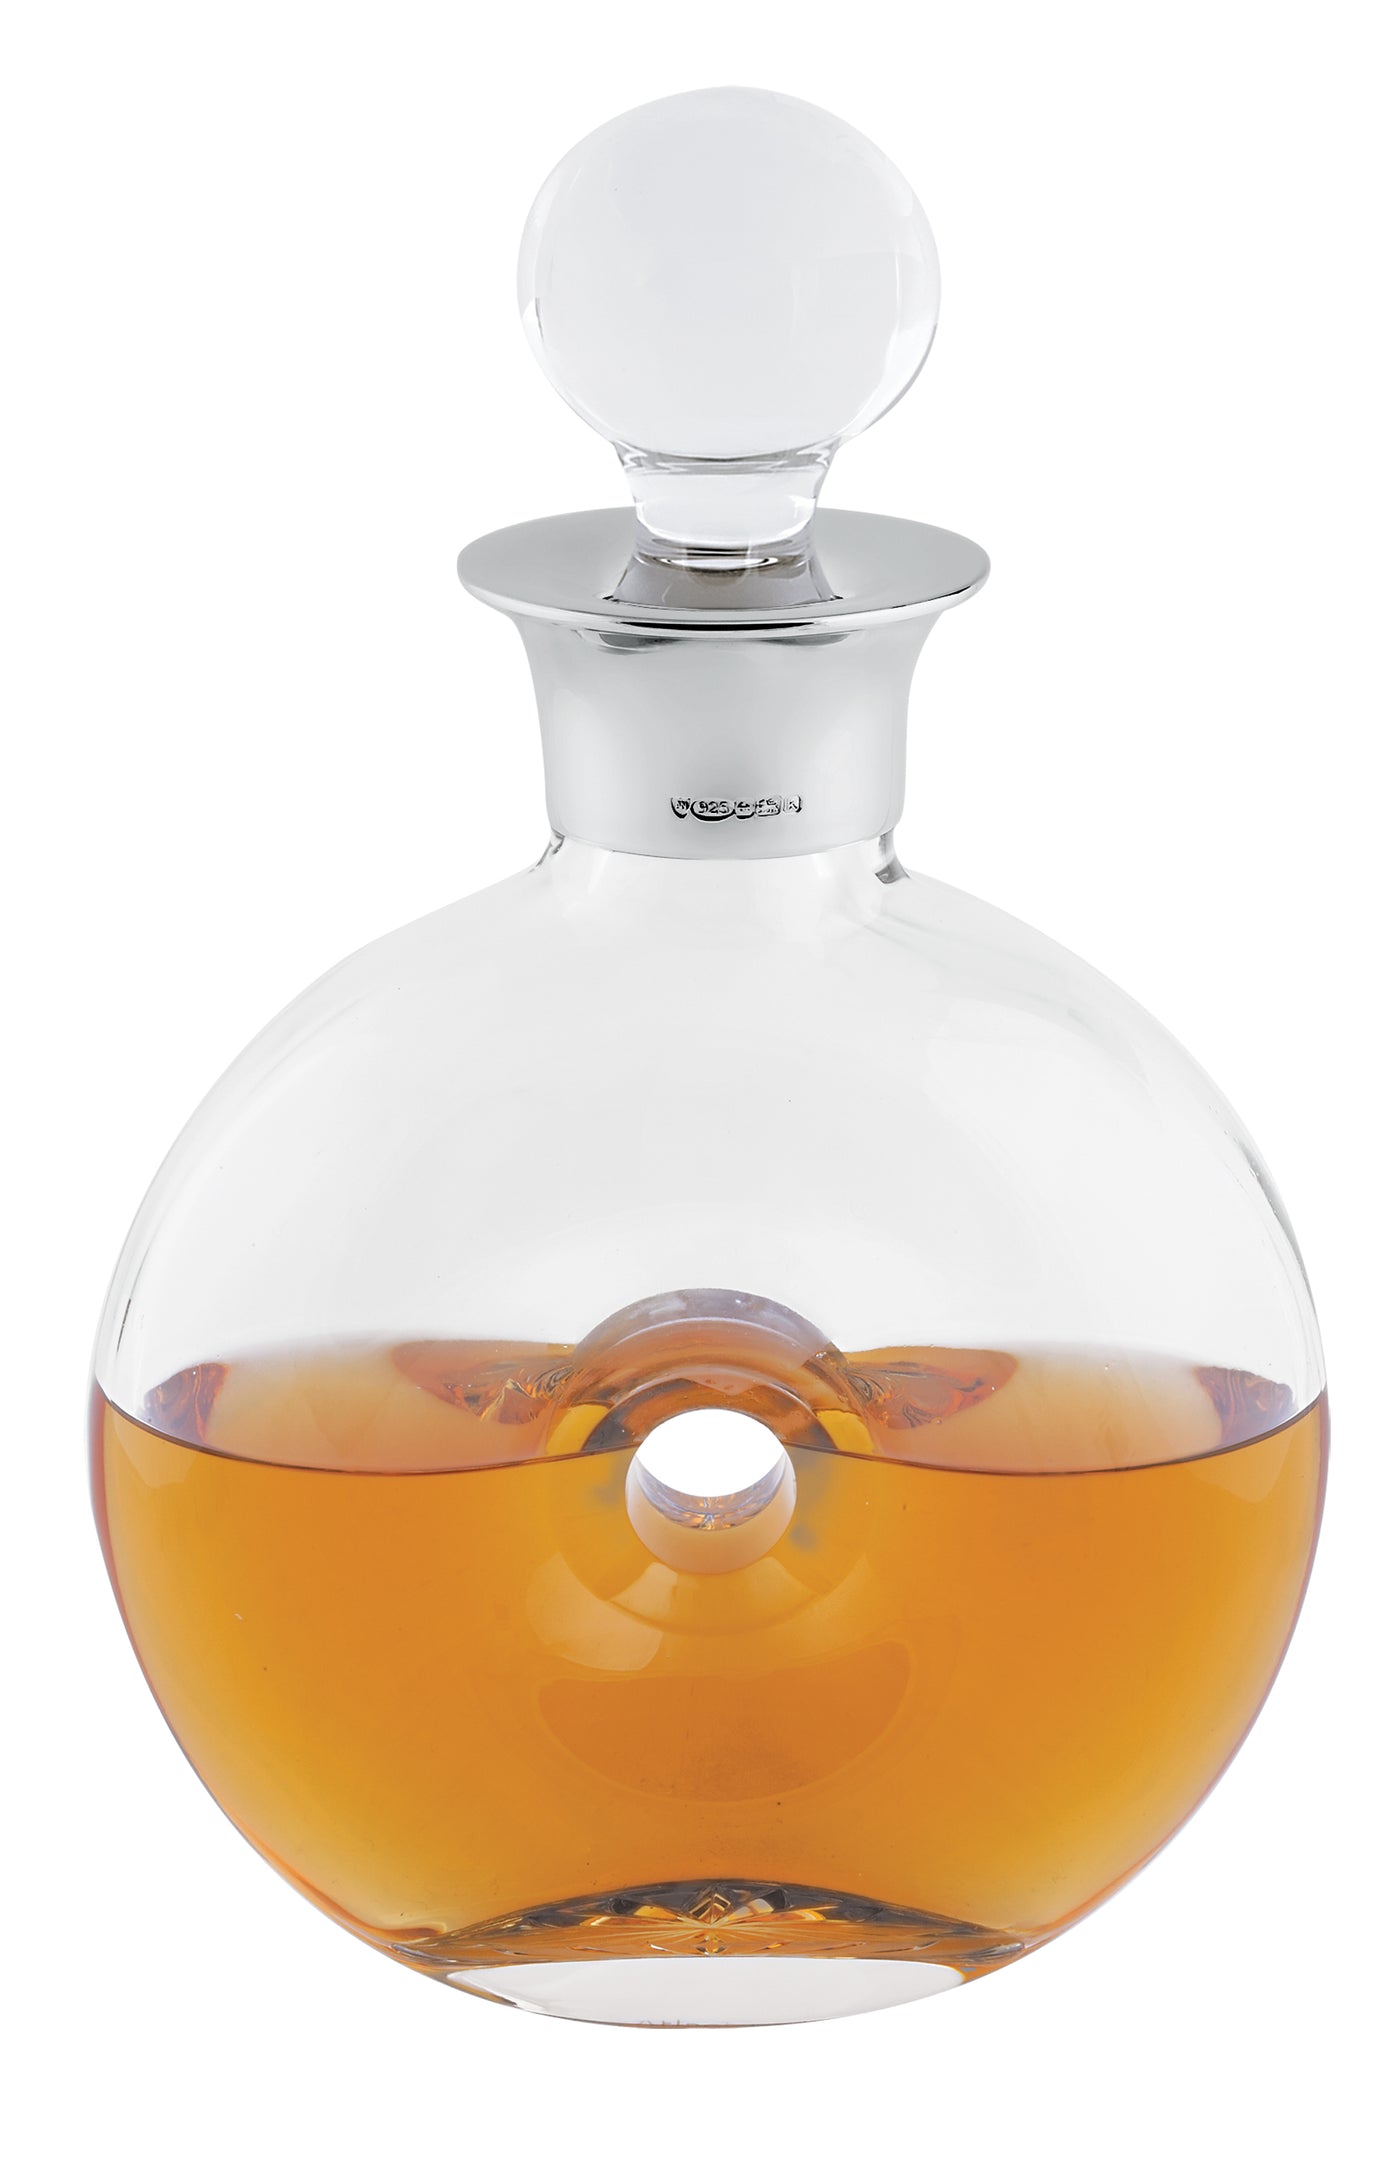 DECANTER ROUND WITH STERLING SILVER MOUNTED COLLAR